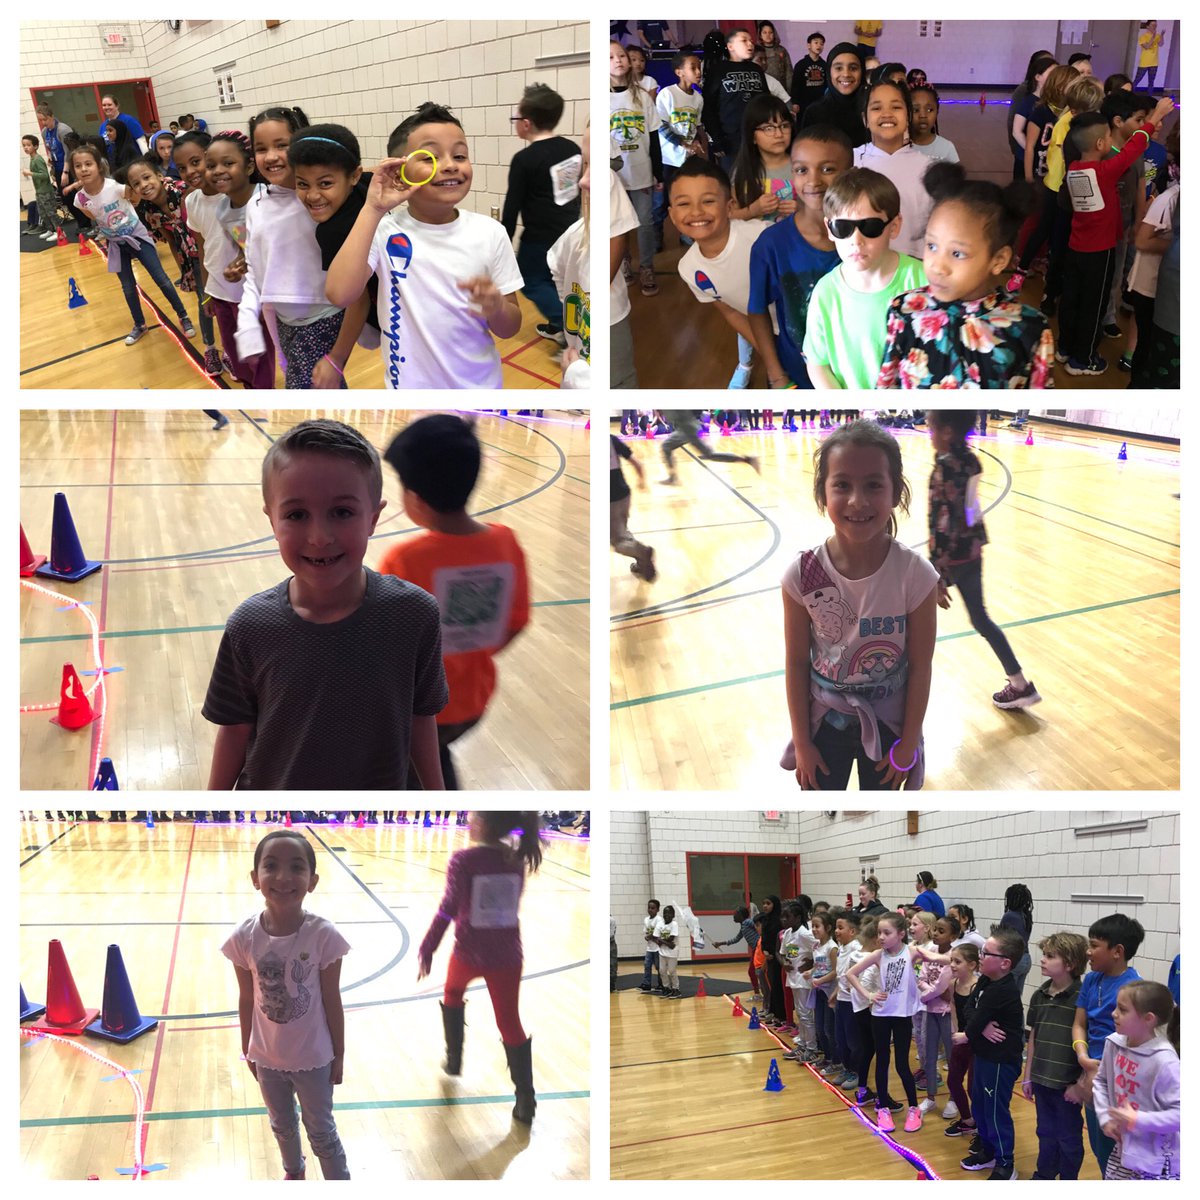 Better late than never! Here are some highlights from our Gage Fun Run! #gagegators #iamsomebody #gogators